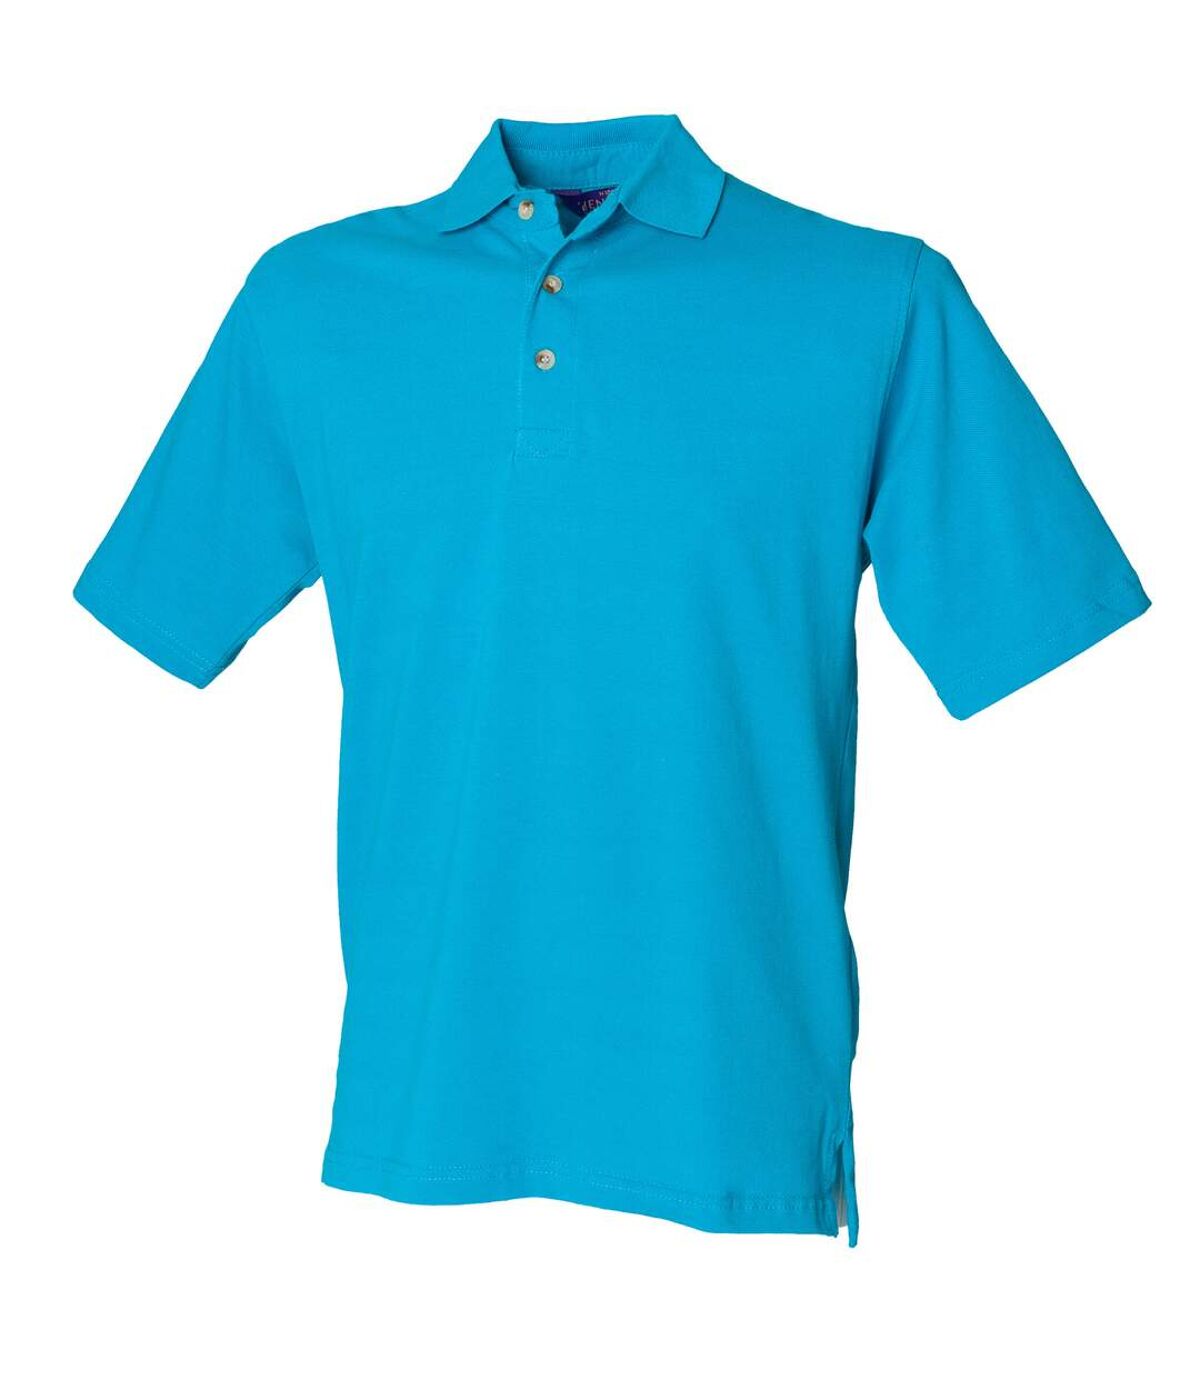 Henbury Mens Classic Plain Polo Shirt With Stand Up Collar (Turquoise) - UTRW617